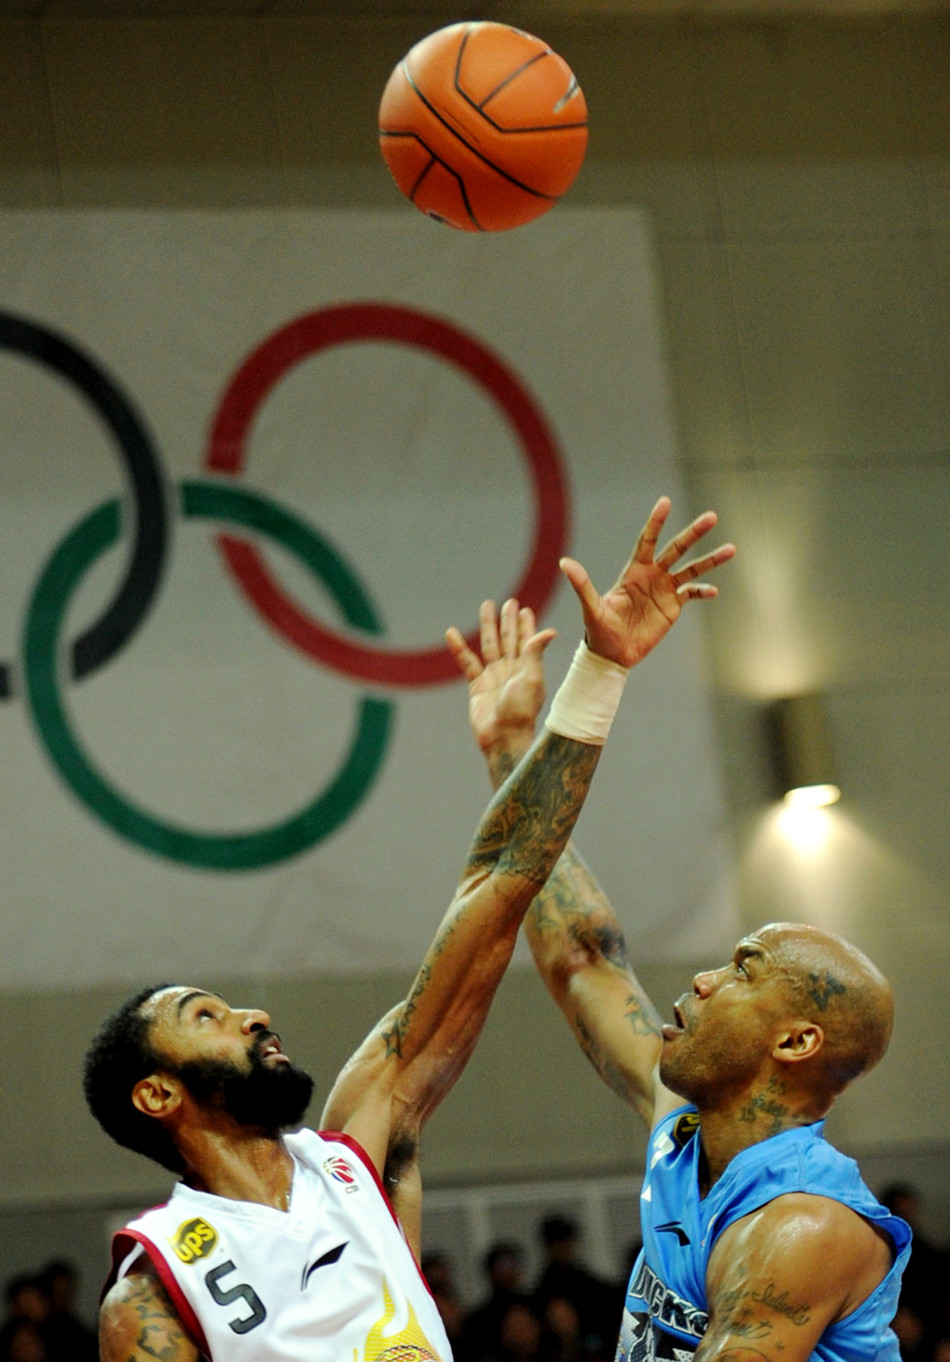 Quincy Douby and Stephon Marbury vie for the ball in a CBA game between Beijing and Zhejiang on Jan.30, 2013.